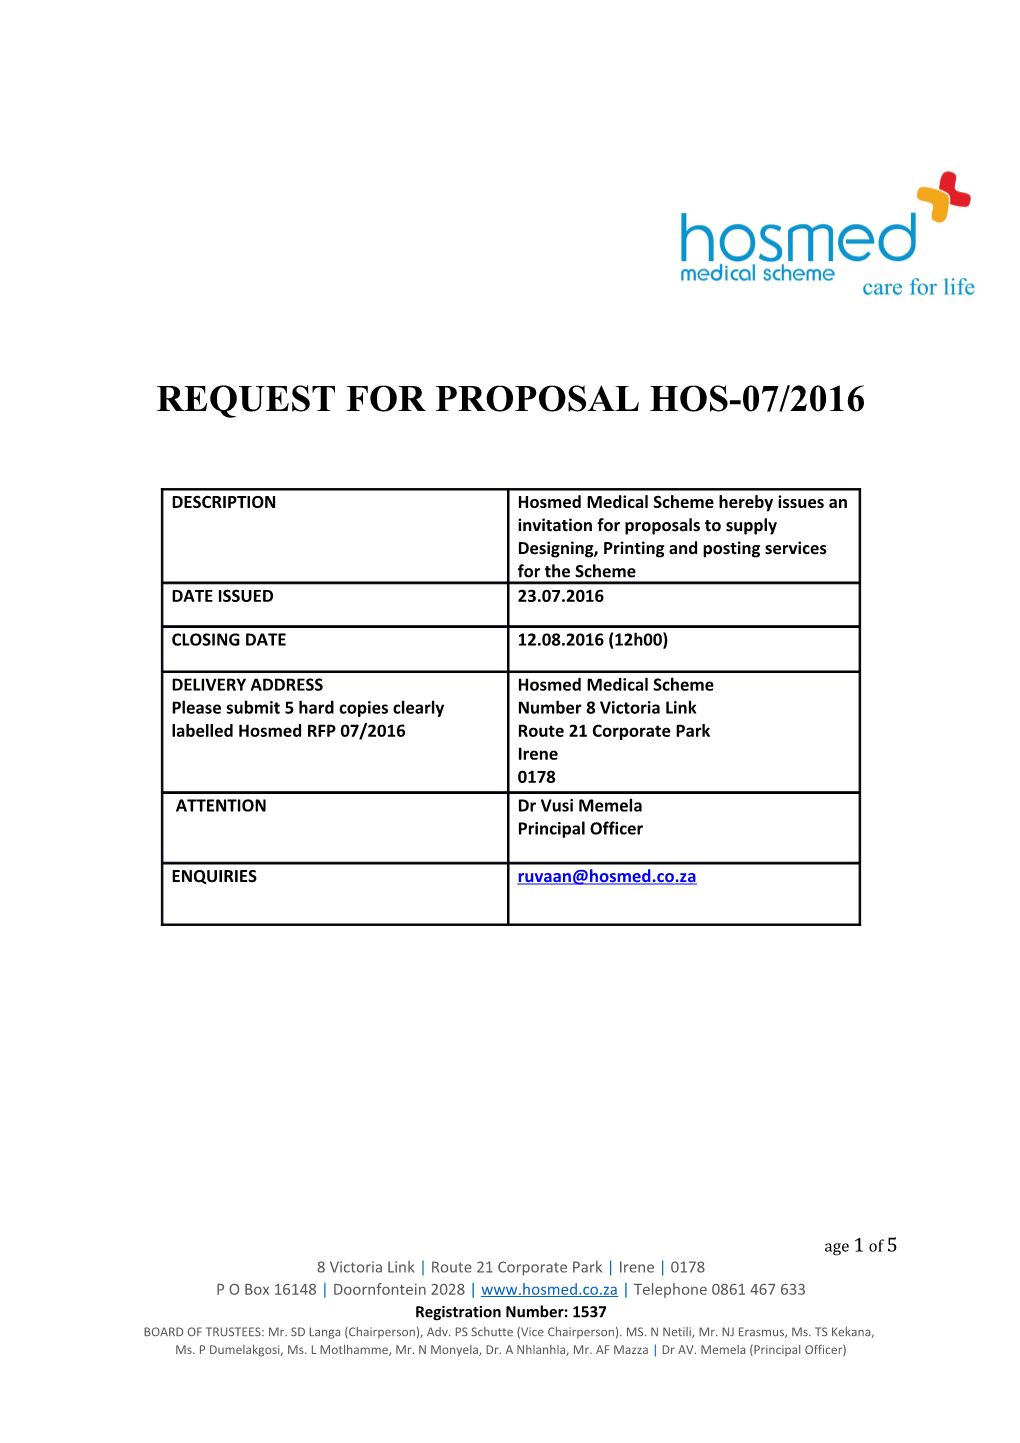 Request for Proposal Hos-07/2016